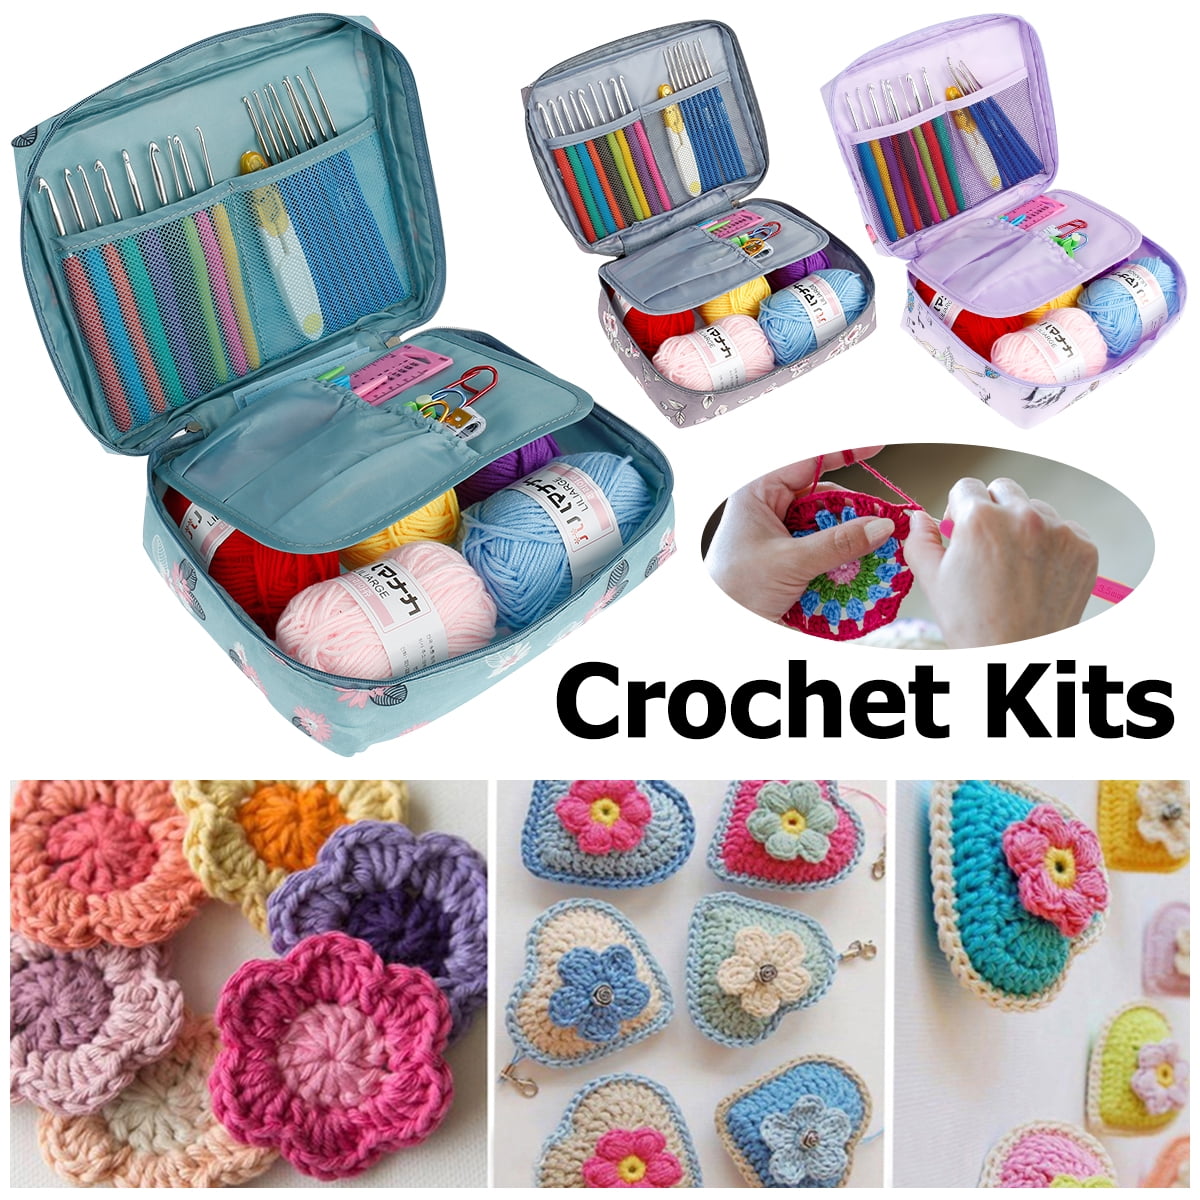 67 PCS Crochet Hook Set with Case, Allnice Crochet Kit with Yarn, Ergonomic  Crochet Kits Include 5 Roll Yarn, Knitting Needles and Other Supplies, Full  Crochet Starter Kit for Beginners Adults 